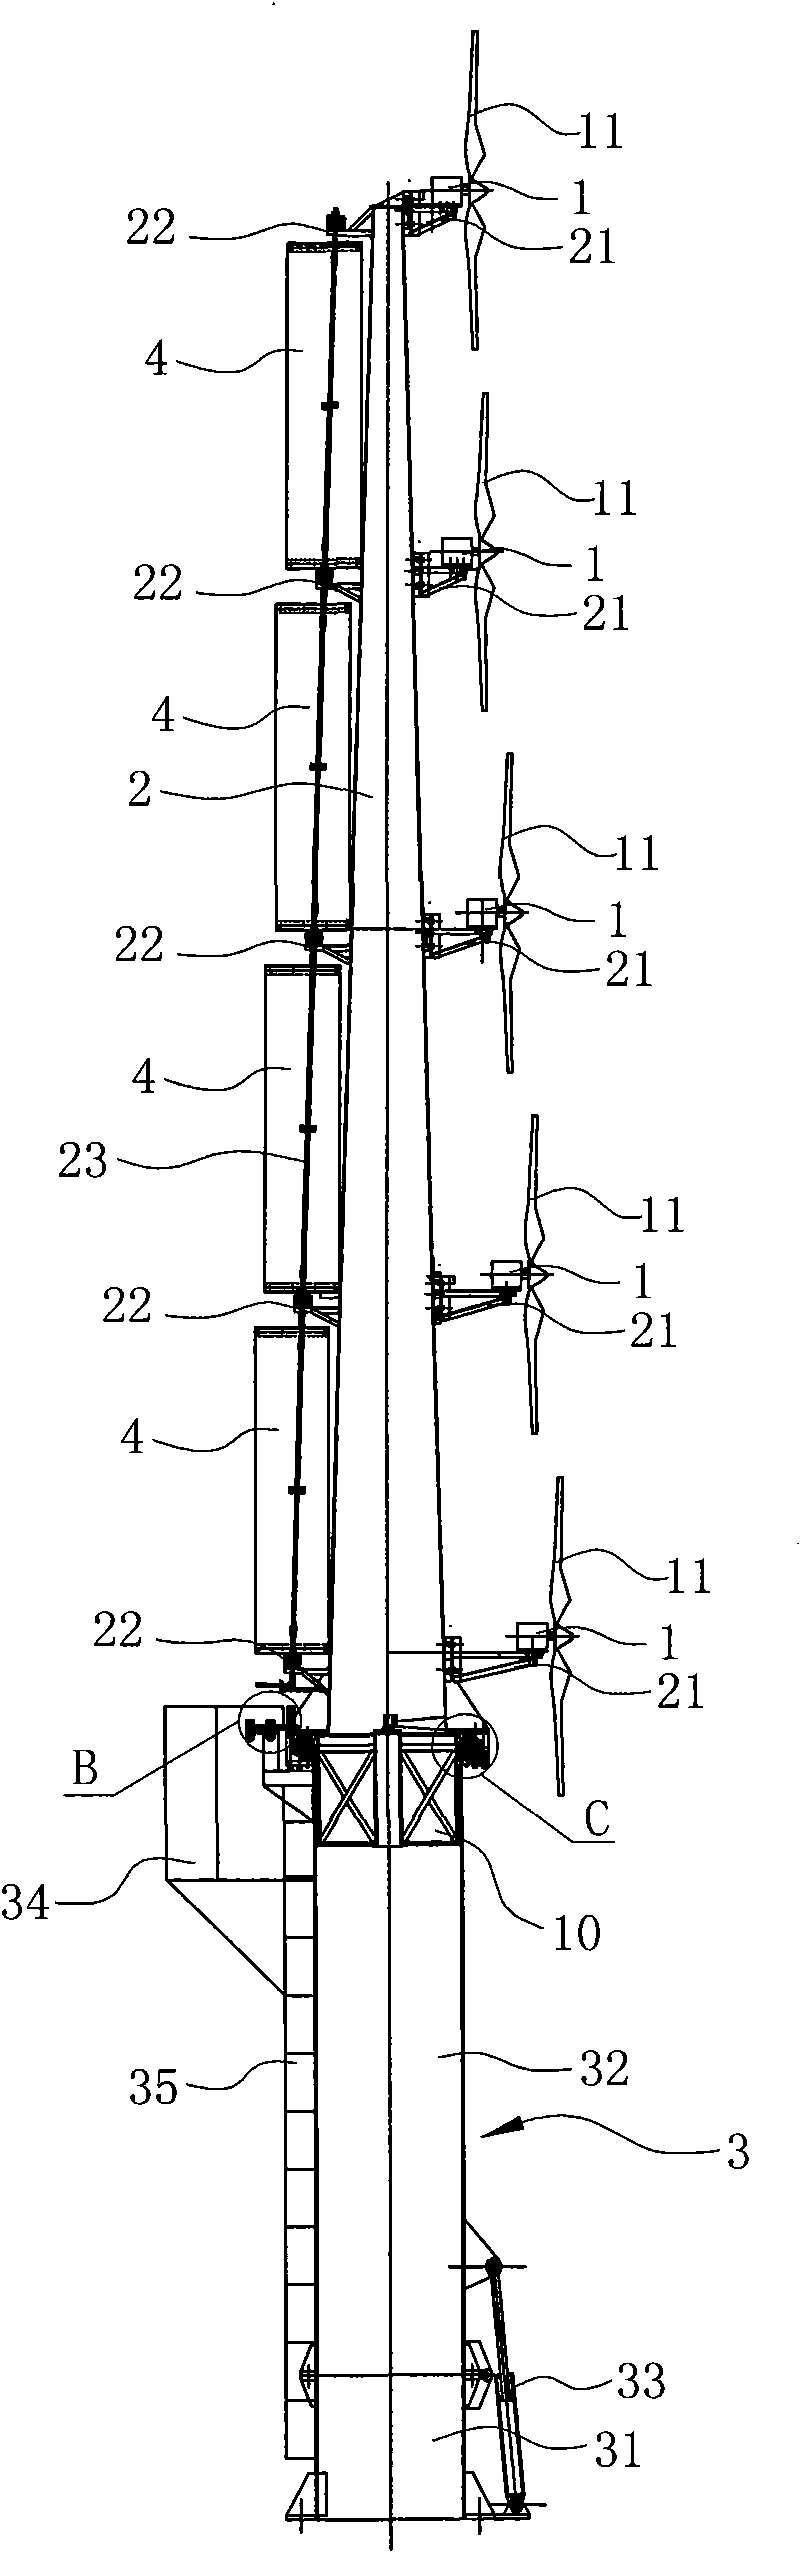 Combined generating device with multiple wind driven generators